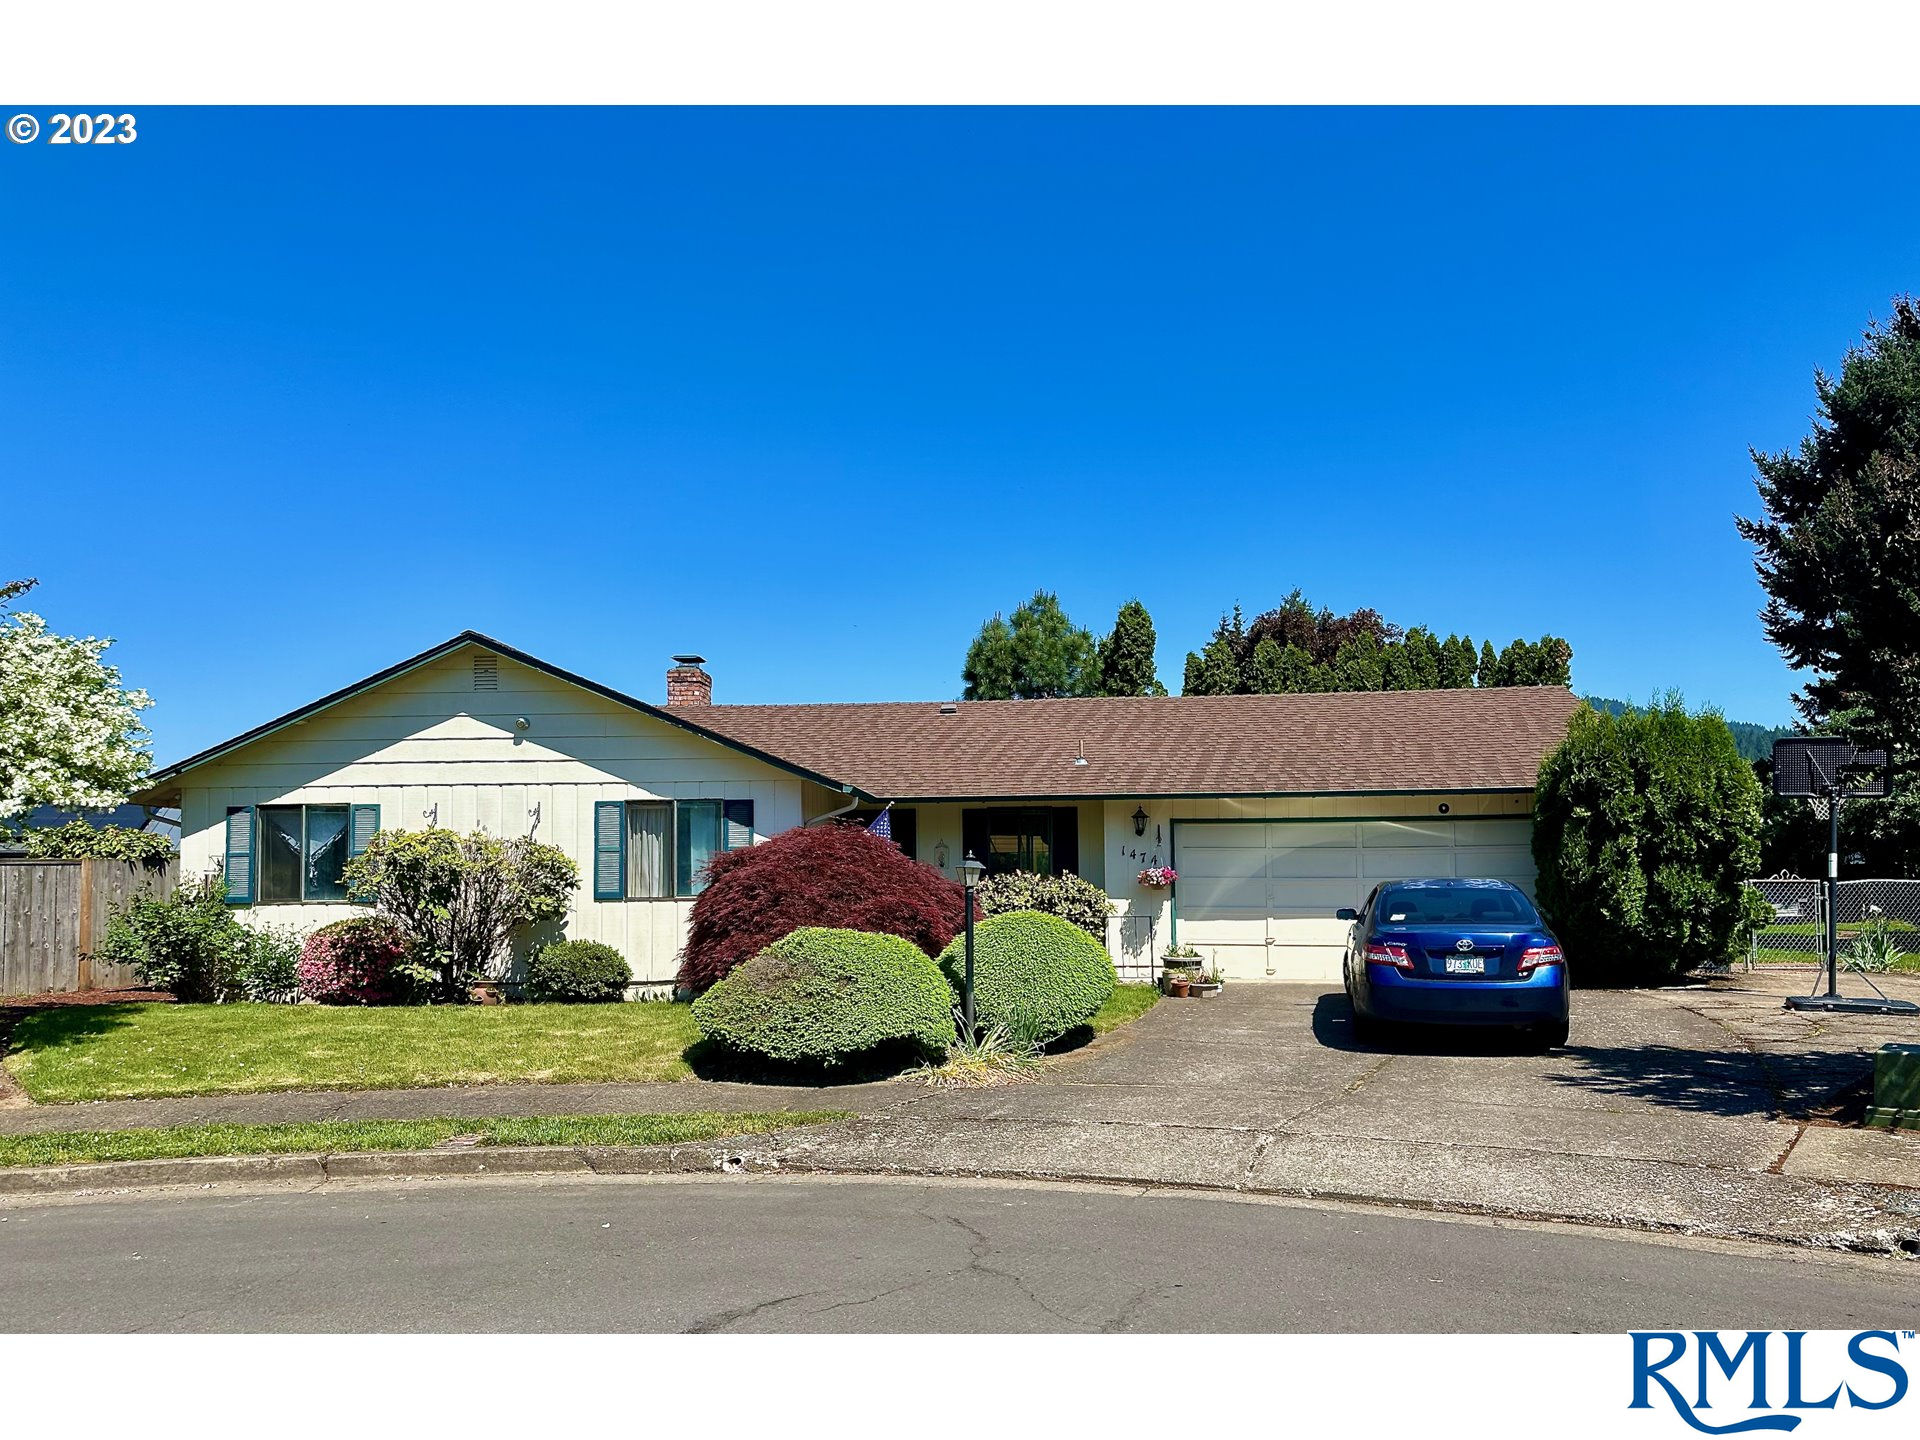 1474 Delrose Ave, Springfield, OR 97477